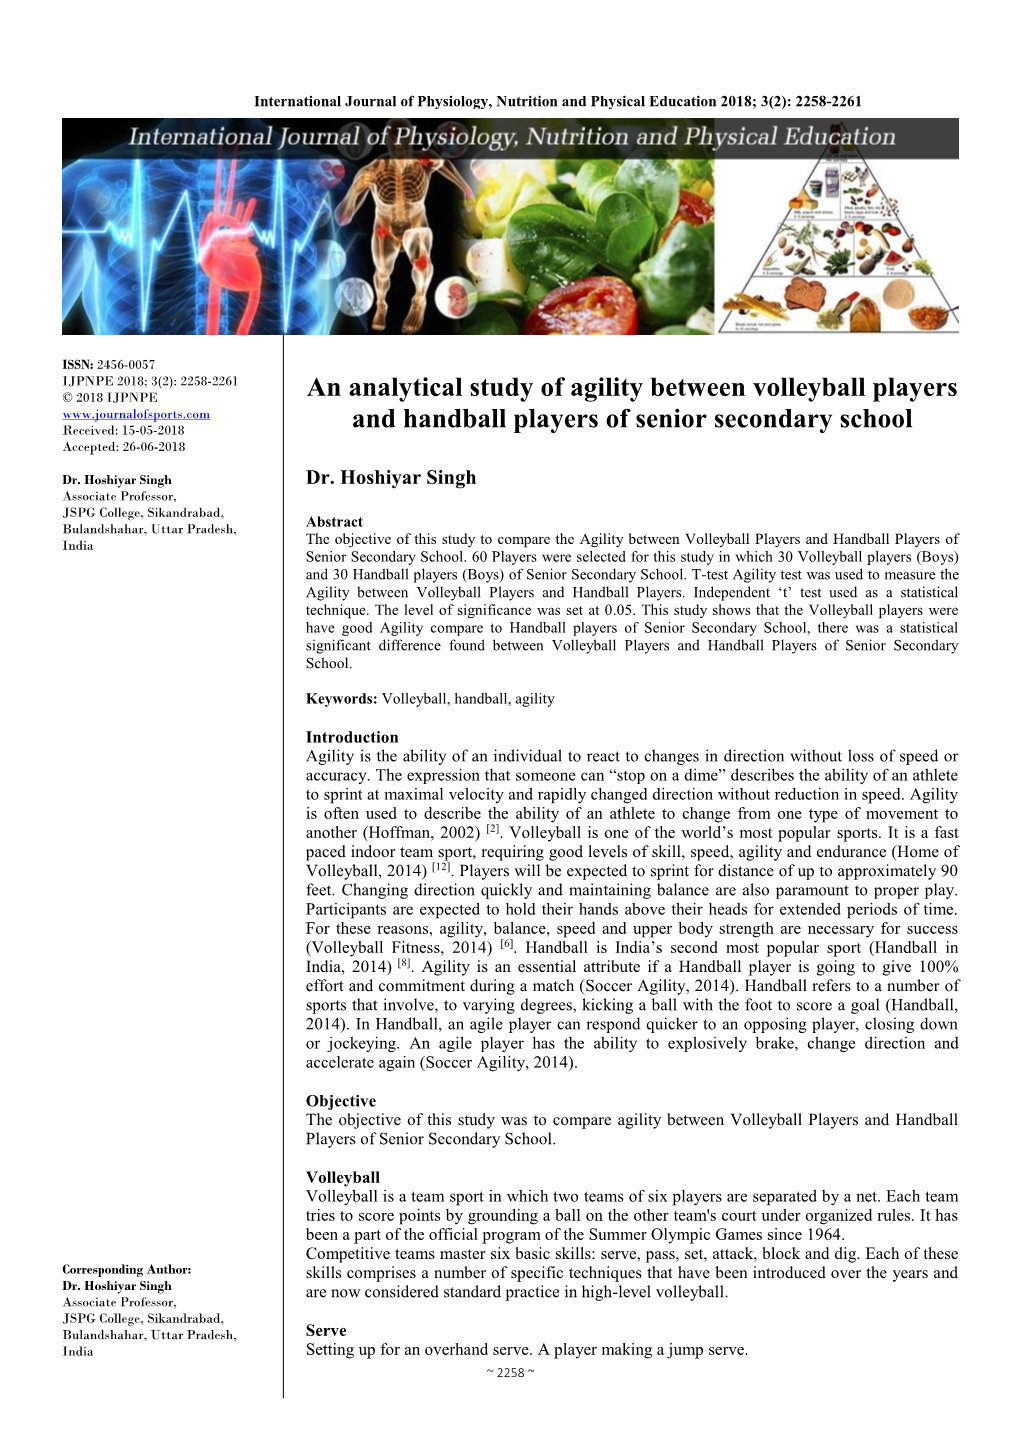 An Analytical Study of Agility Between Volleyball Players and Handball Players of Senior Secondary School